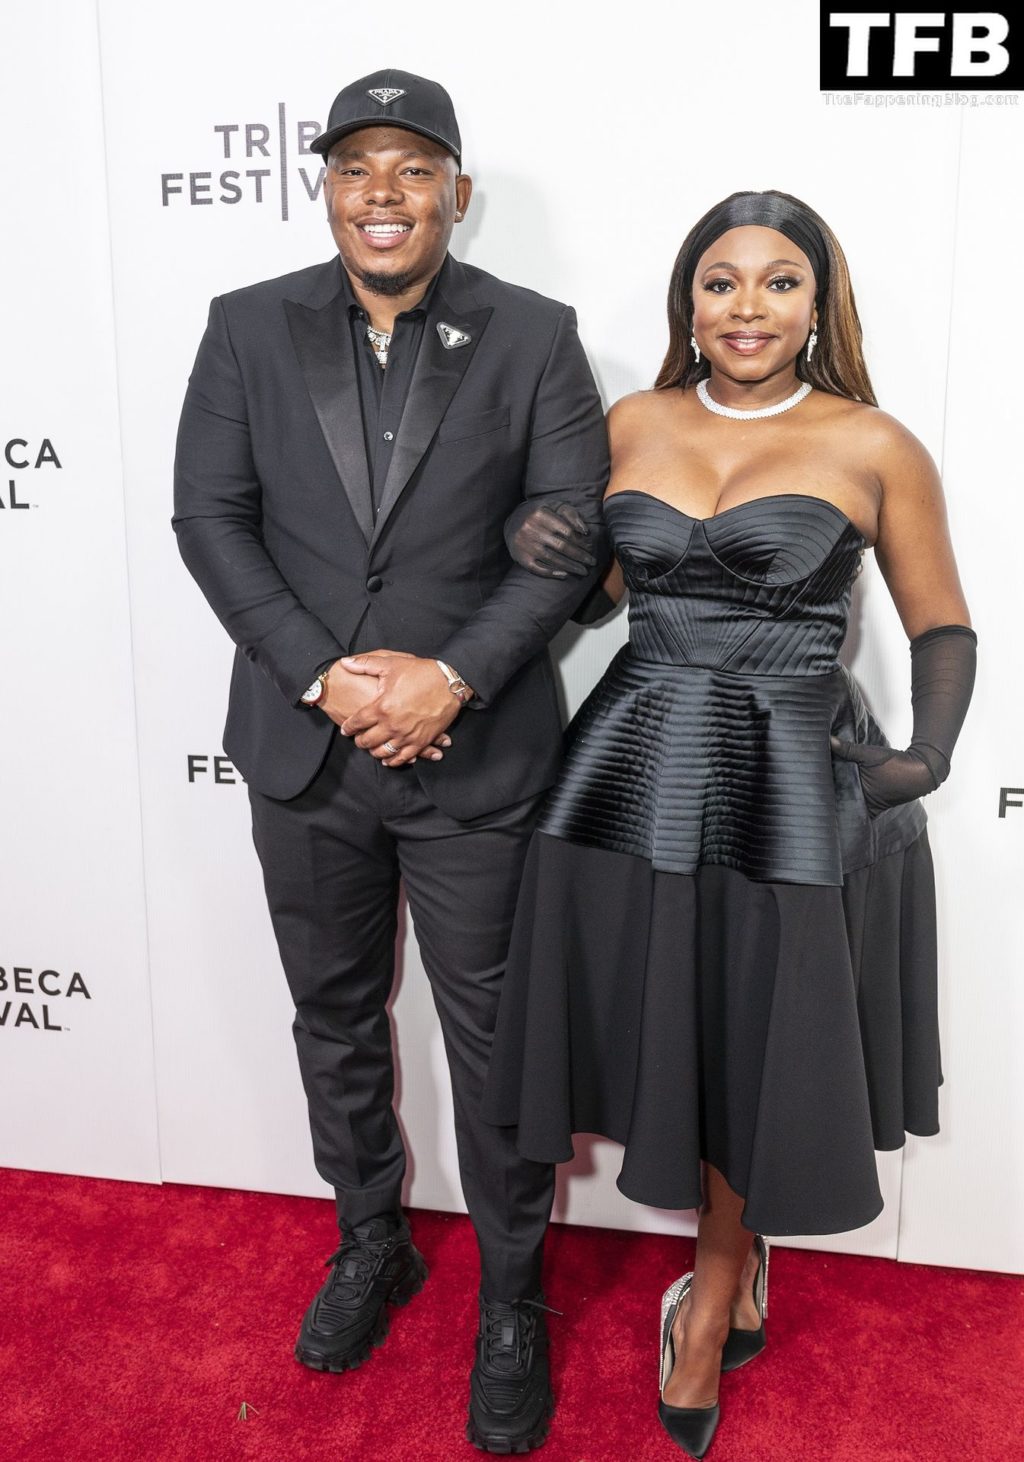 Naturi Naughton Displays Her Cleavage at the 2022 Tribeca Festival in New York (28 Photos)